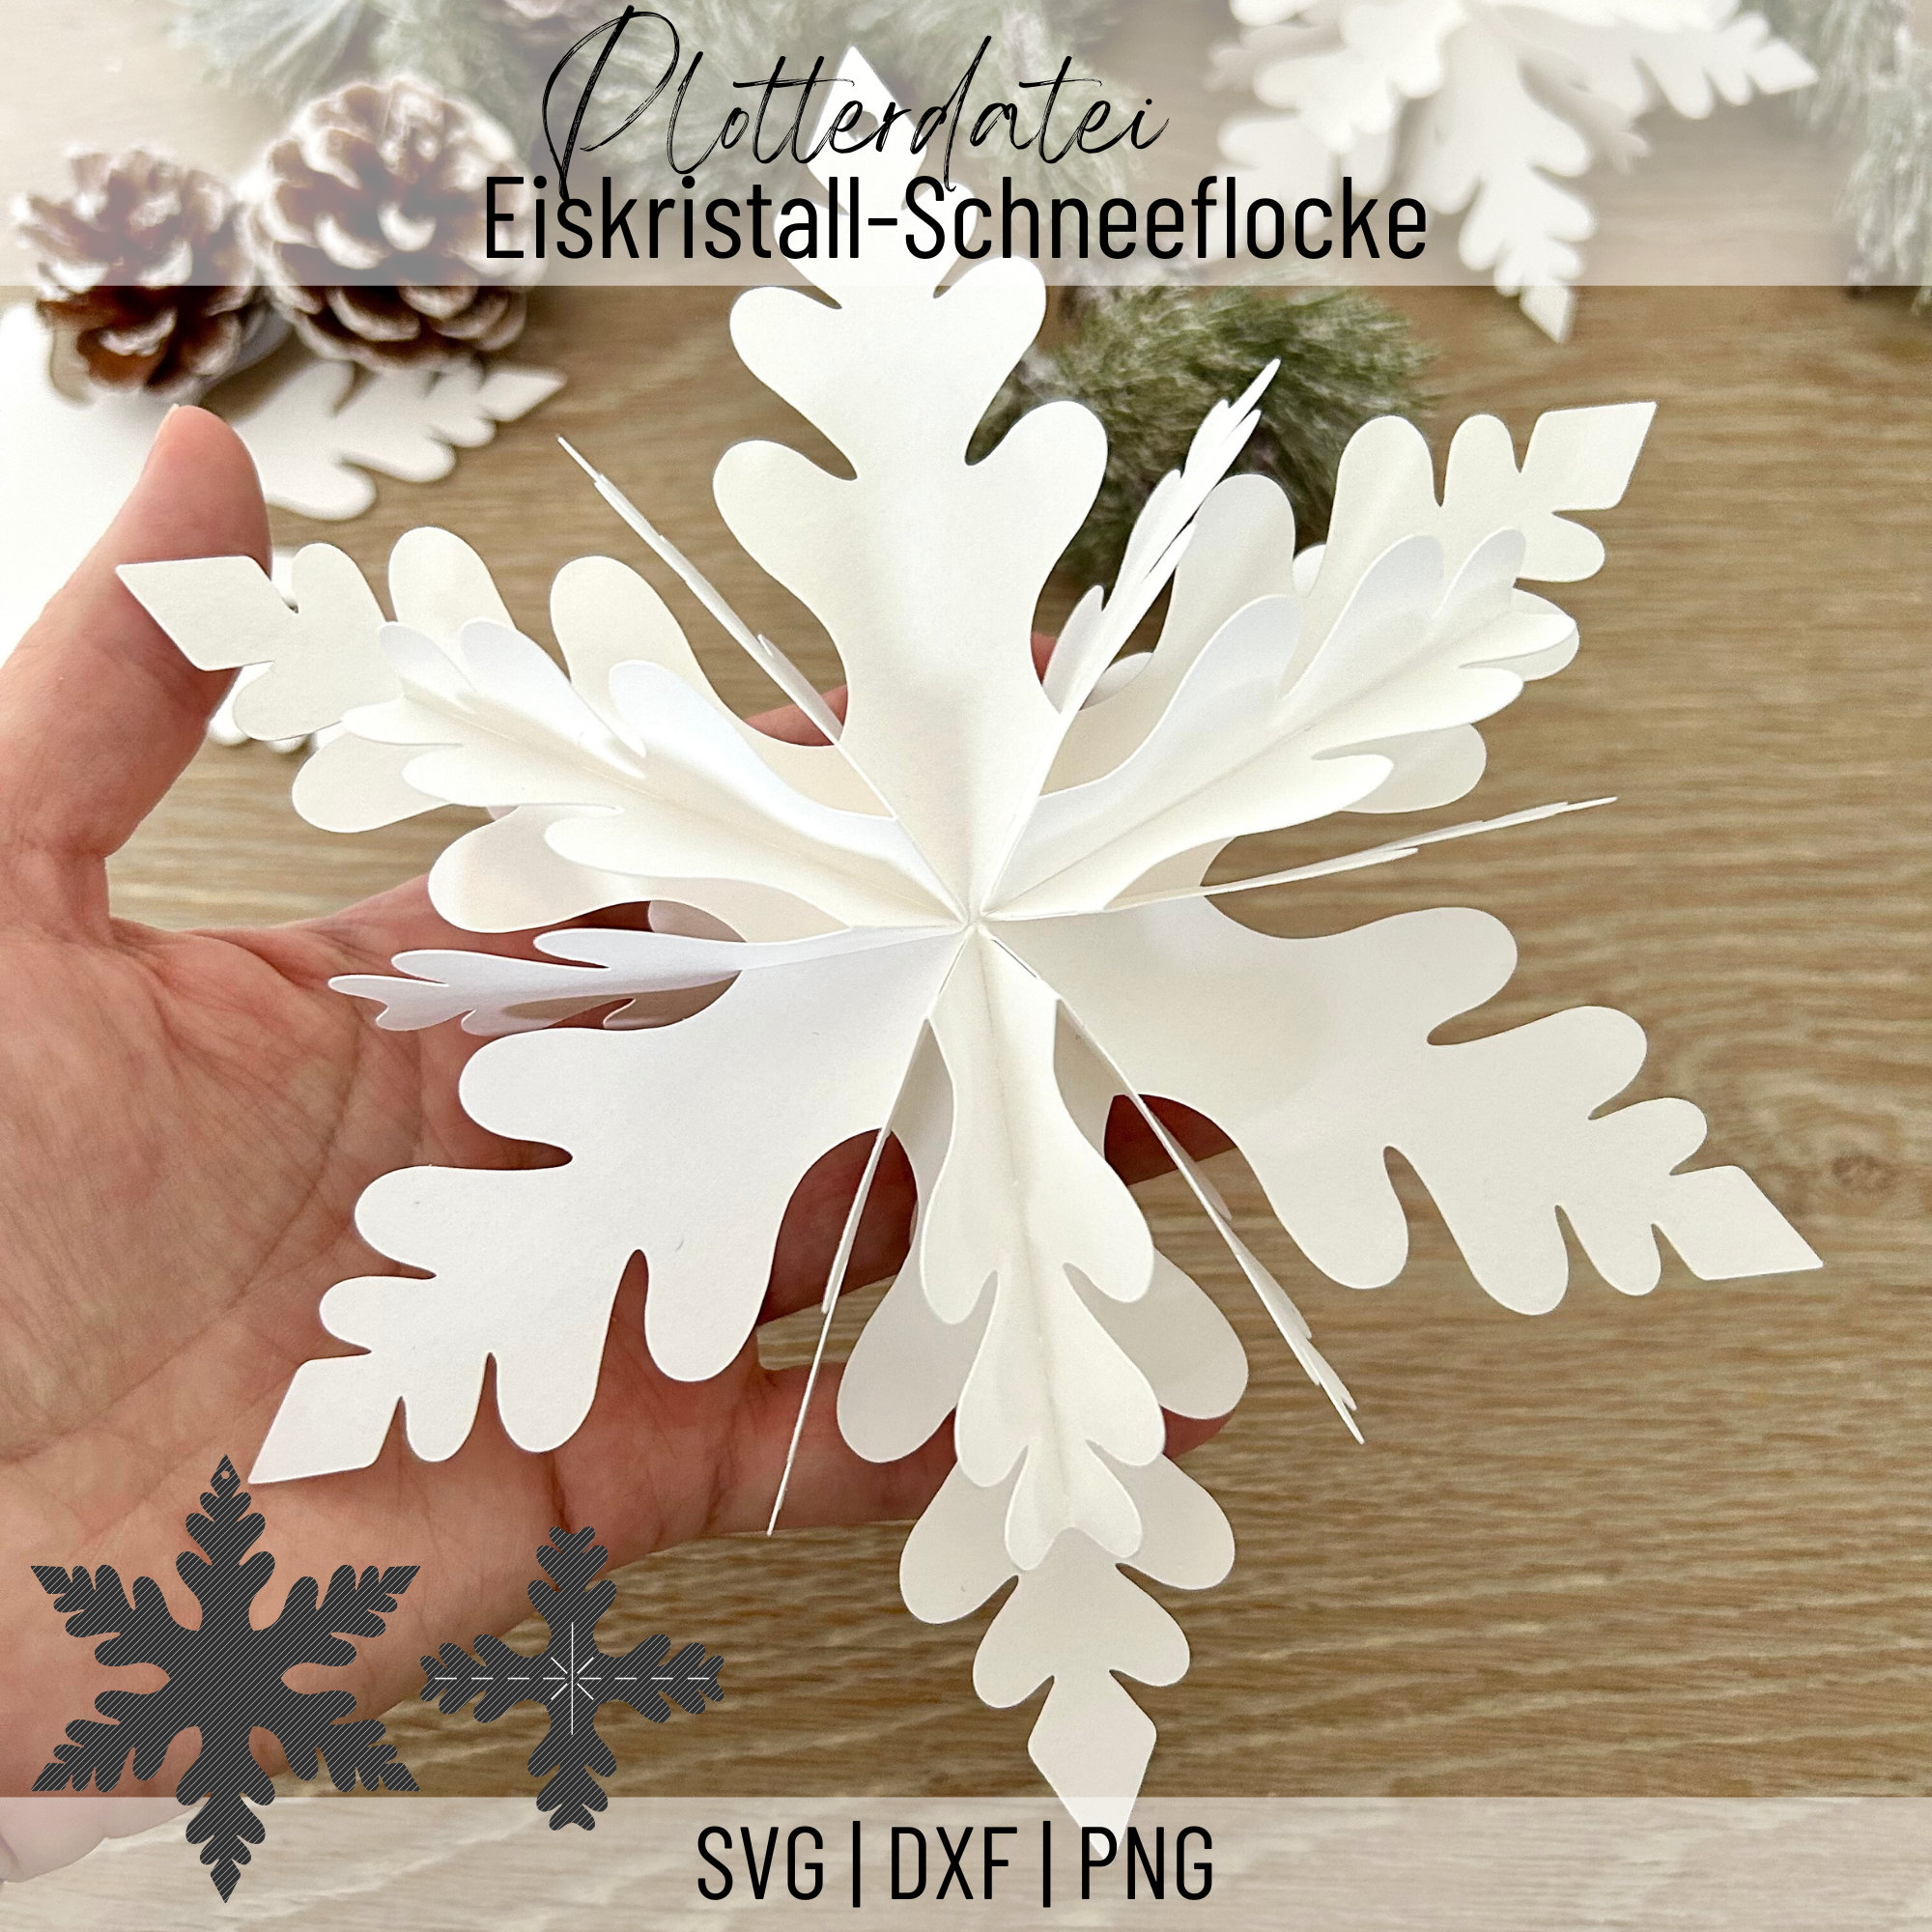 3D Snowflakes SVG » SVG Designs For a Magical Woodland